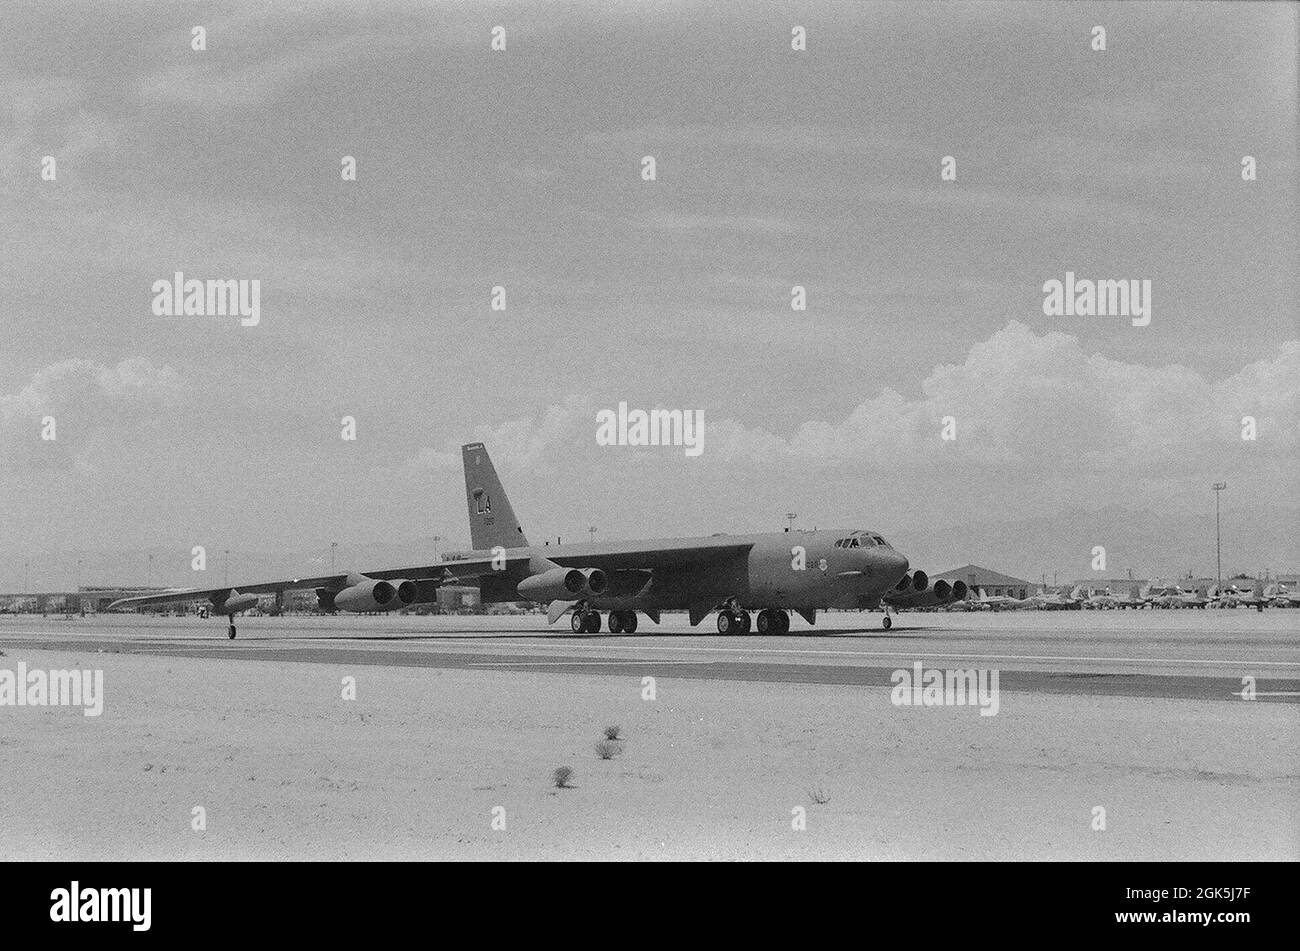 A B-52H Stratofortress bomber assigned to the 340th Weapons Squadron at Barksdale Air Force Base, Louisiana, taxis down the runway during Red Flag 21-3 at Nellis Air Force Base, Nevada, Aug. 4, 2021. Red Flag began in 1975 as an aerial-combat exercise but has evolved to include war-fighting across air, space and cyberspace domains. Prior to the invention of digital cameras, military members used film cameras to document combat missions dating all the way back to late 1800s. Stock Photo